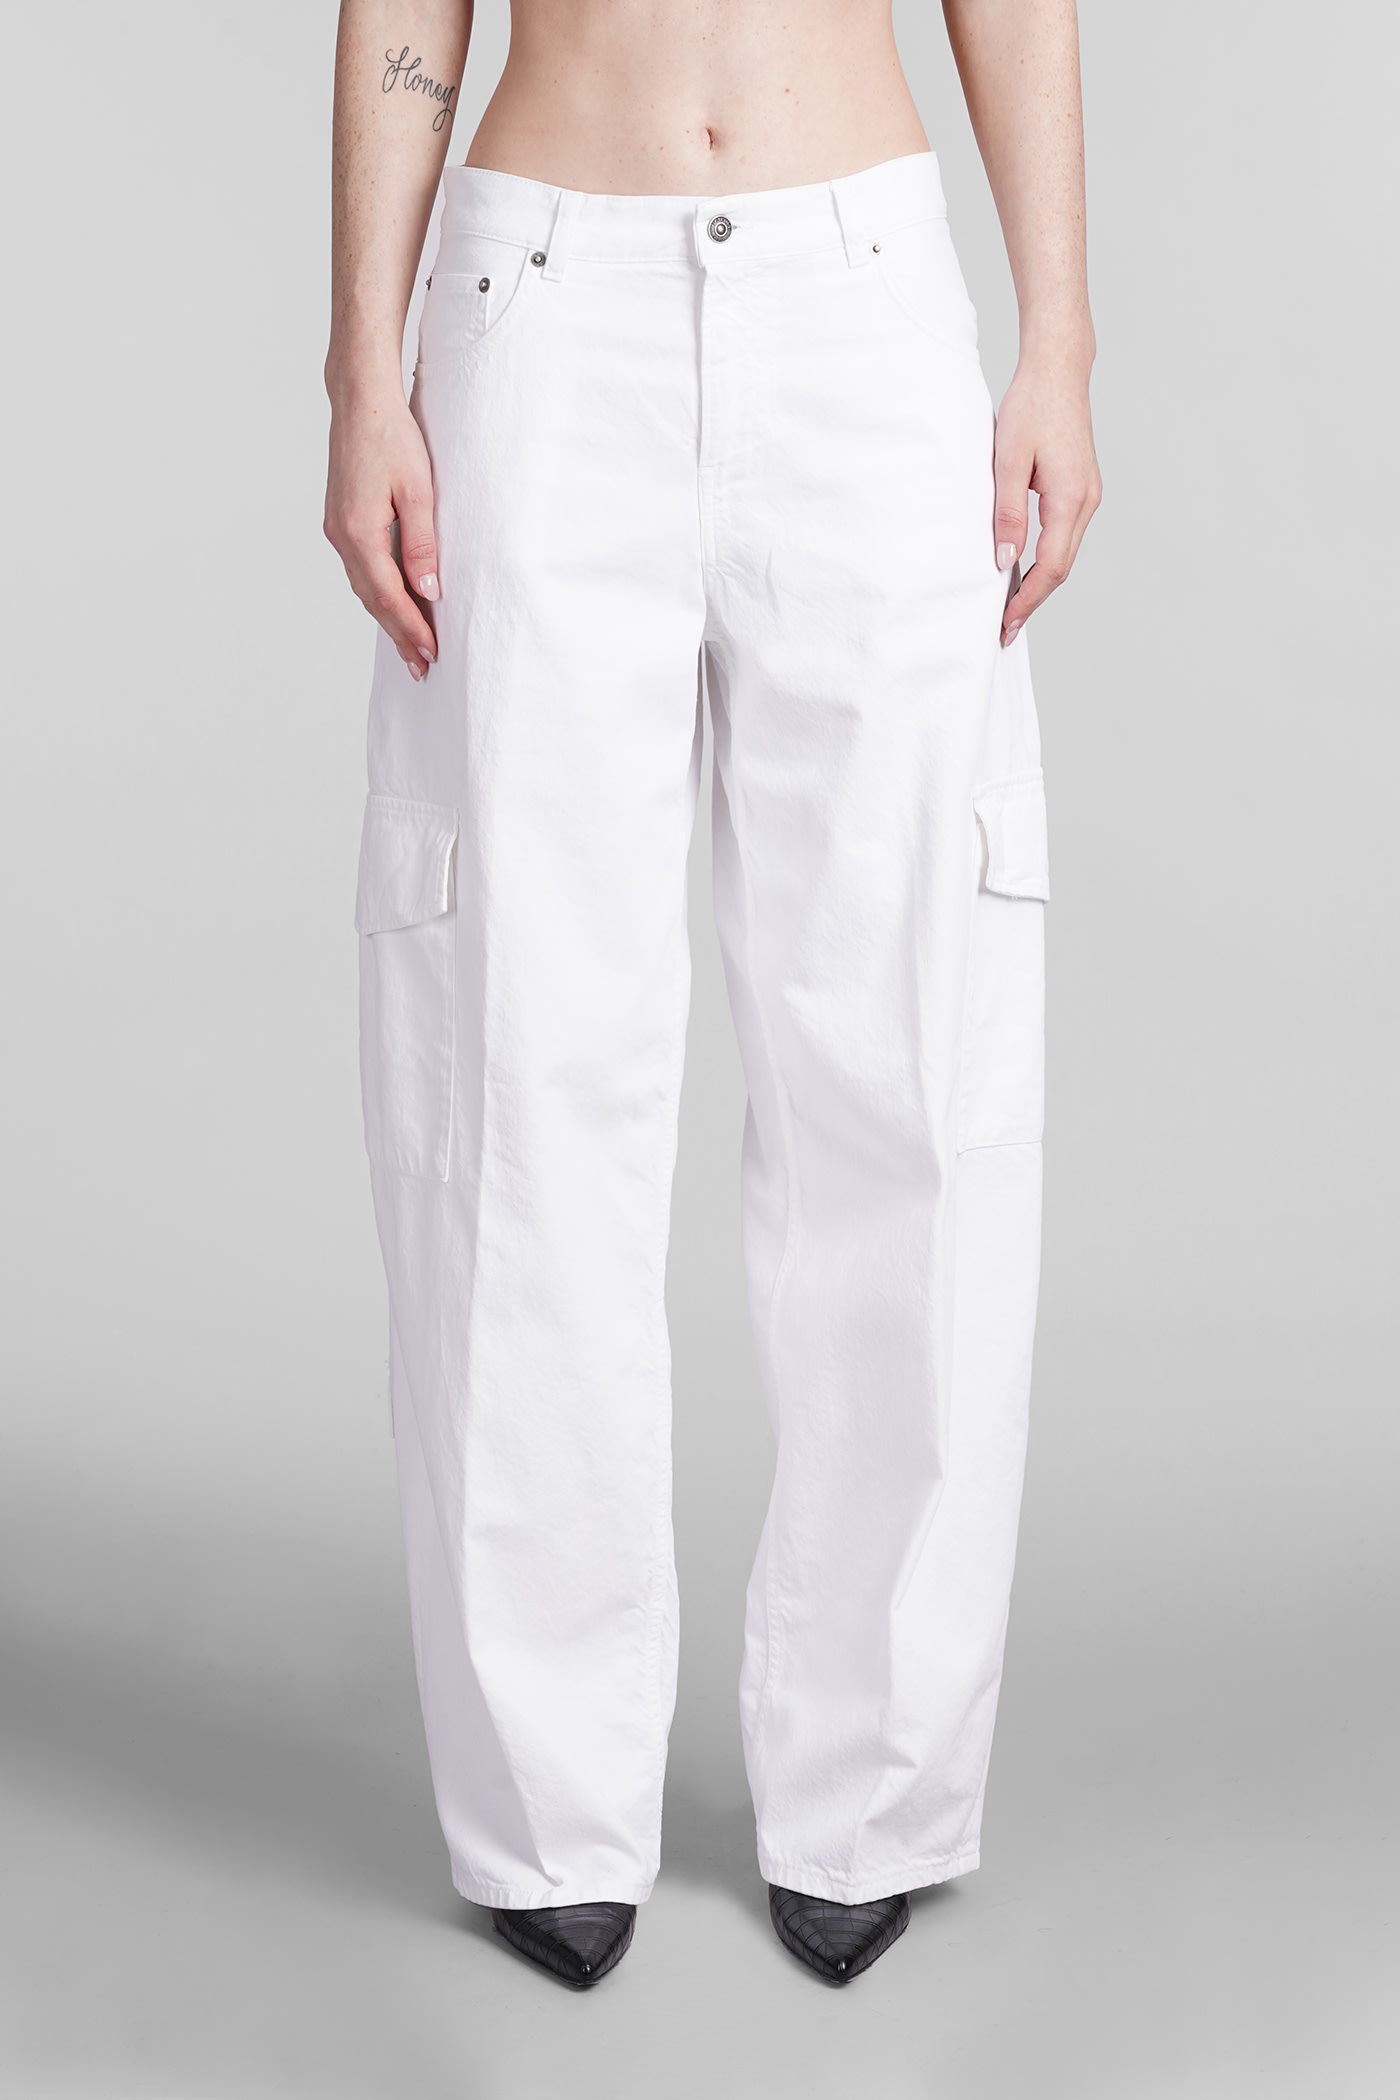 Bethany Jeans In White Cotton